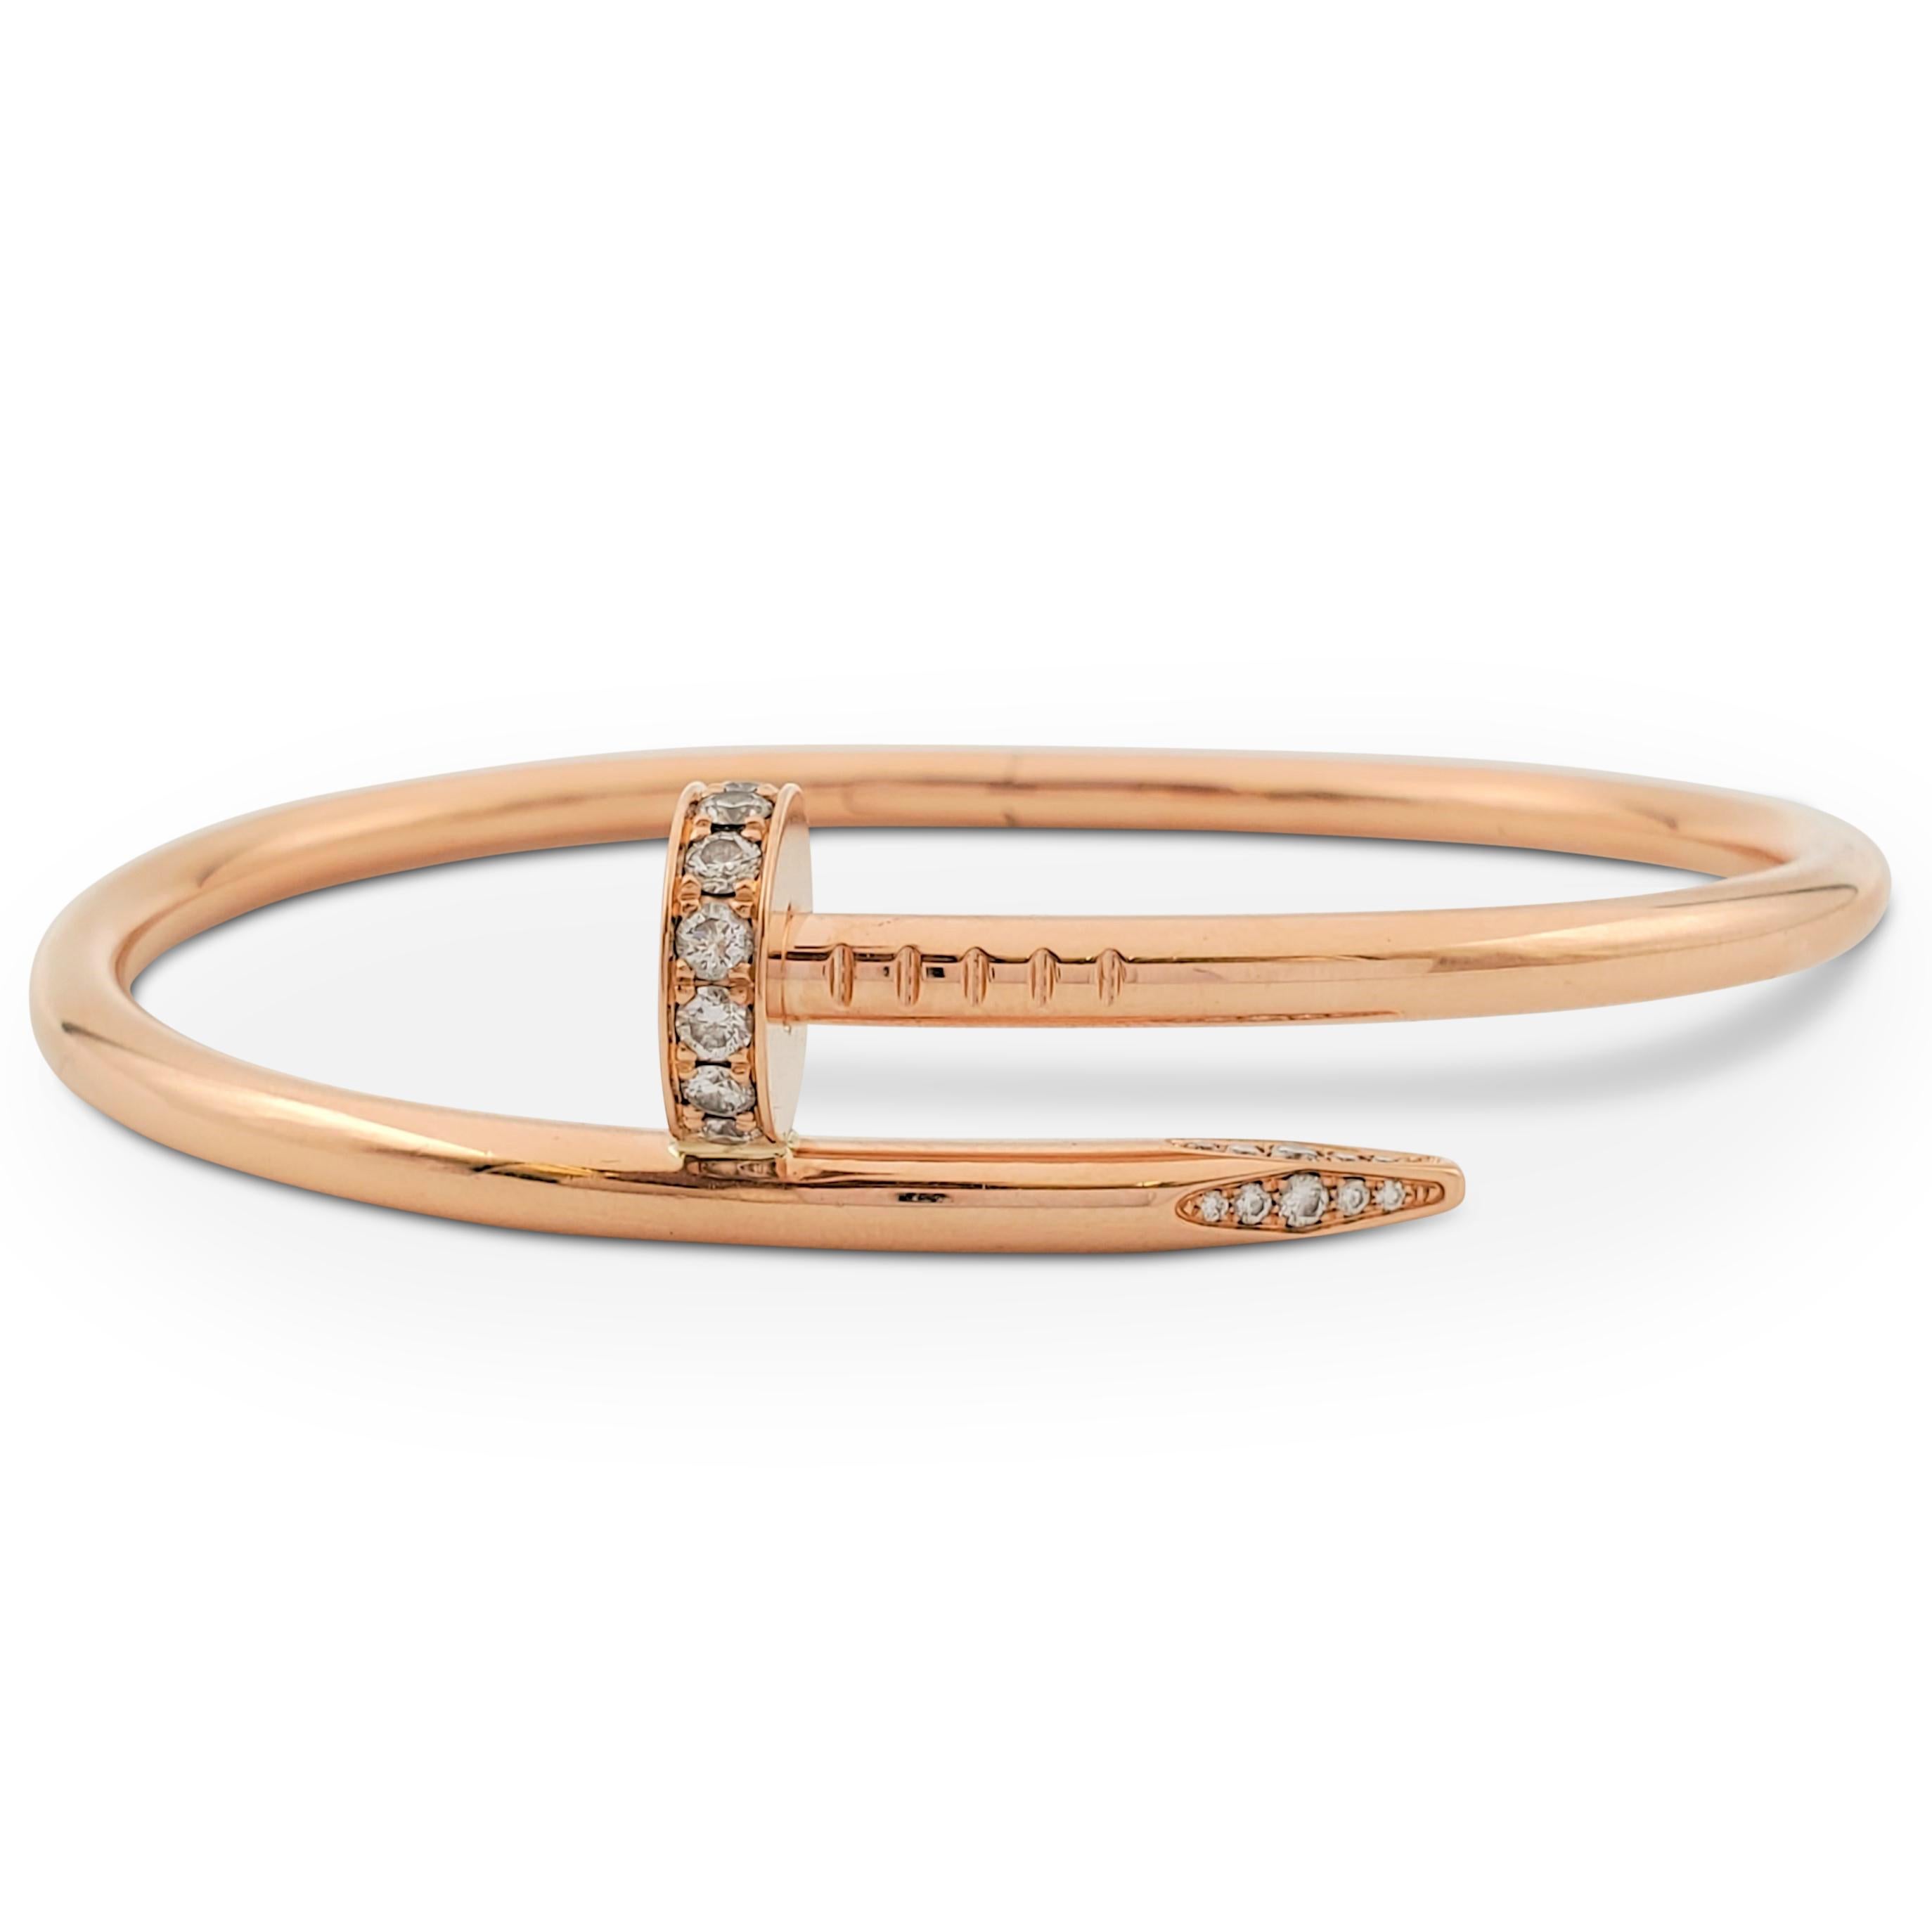 Designed as a 'just a nail', this authentic Cartier 'Juste un Clou' bracelet is an innovative twist on a familiar and ordinary object. The bracelet is set with high-quality round brilliant cut diamonds (E-F color, VS) weighing an estimated 0.59